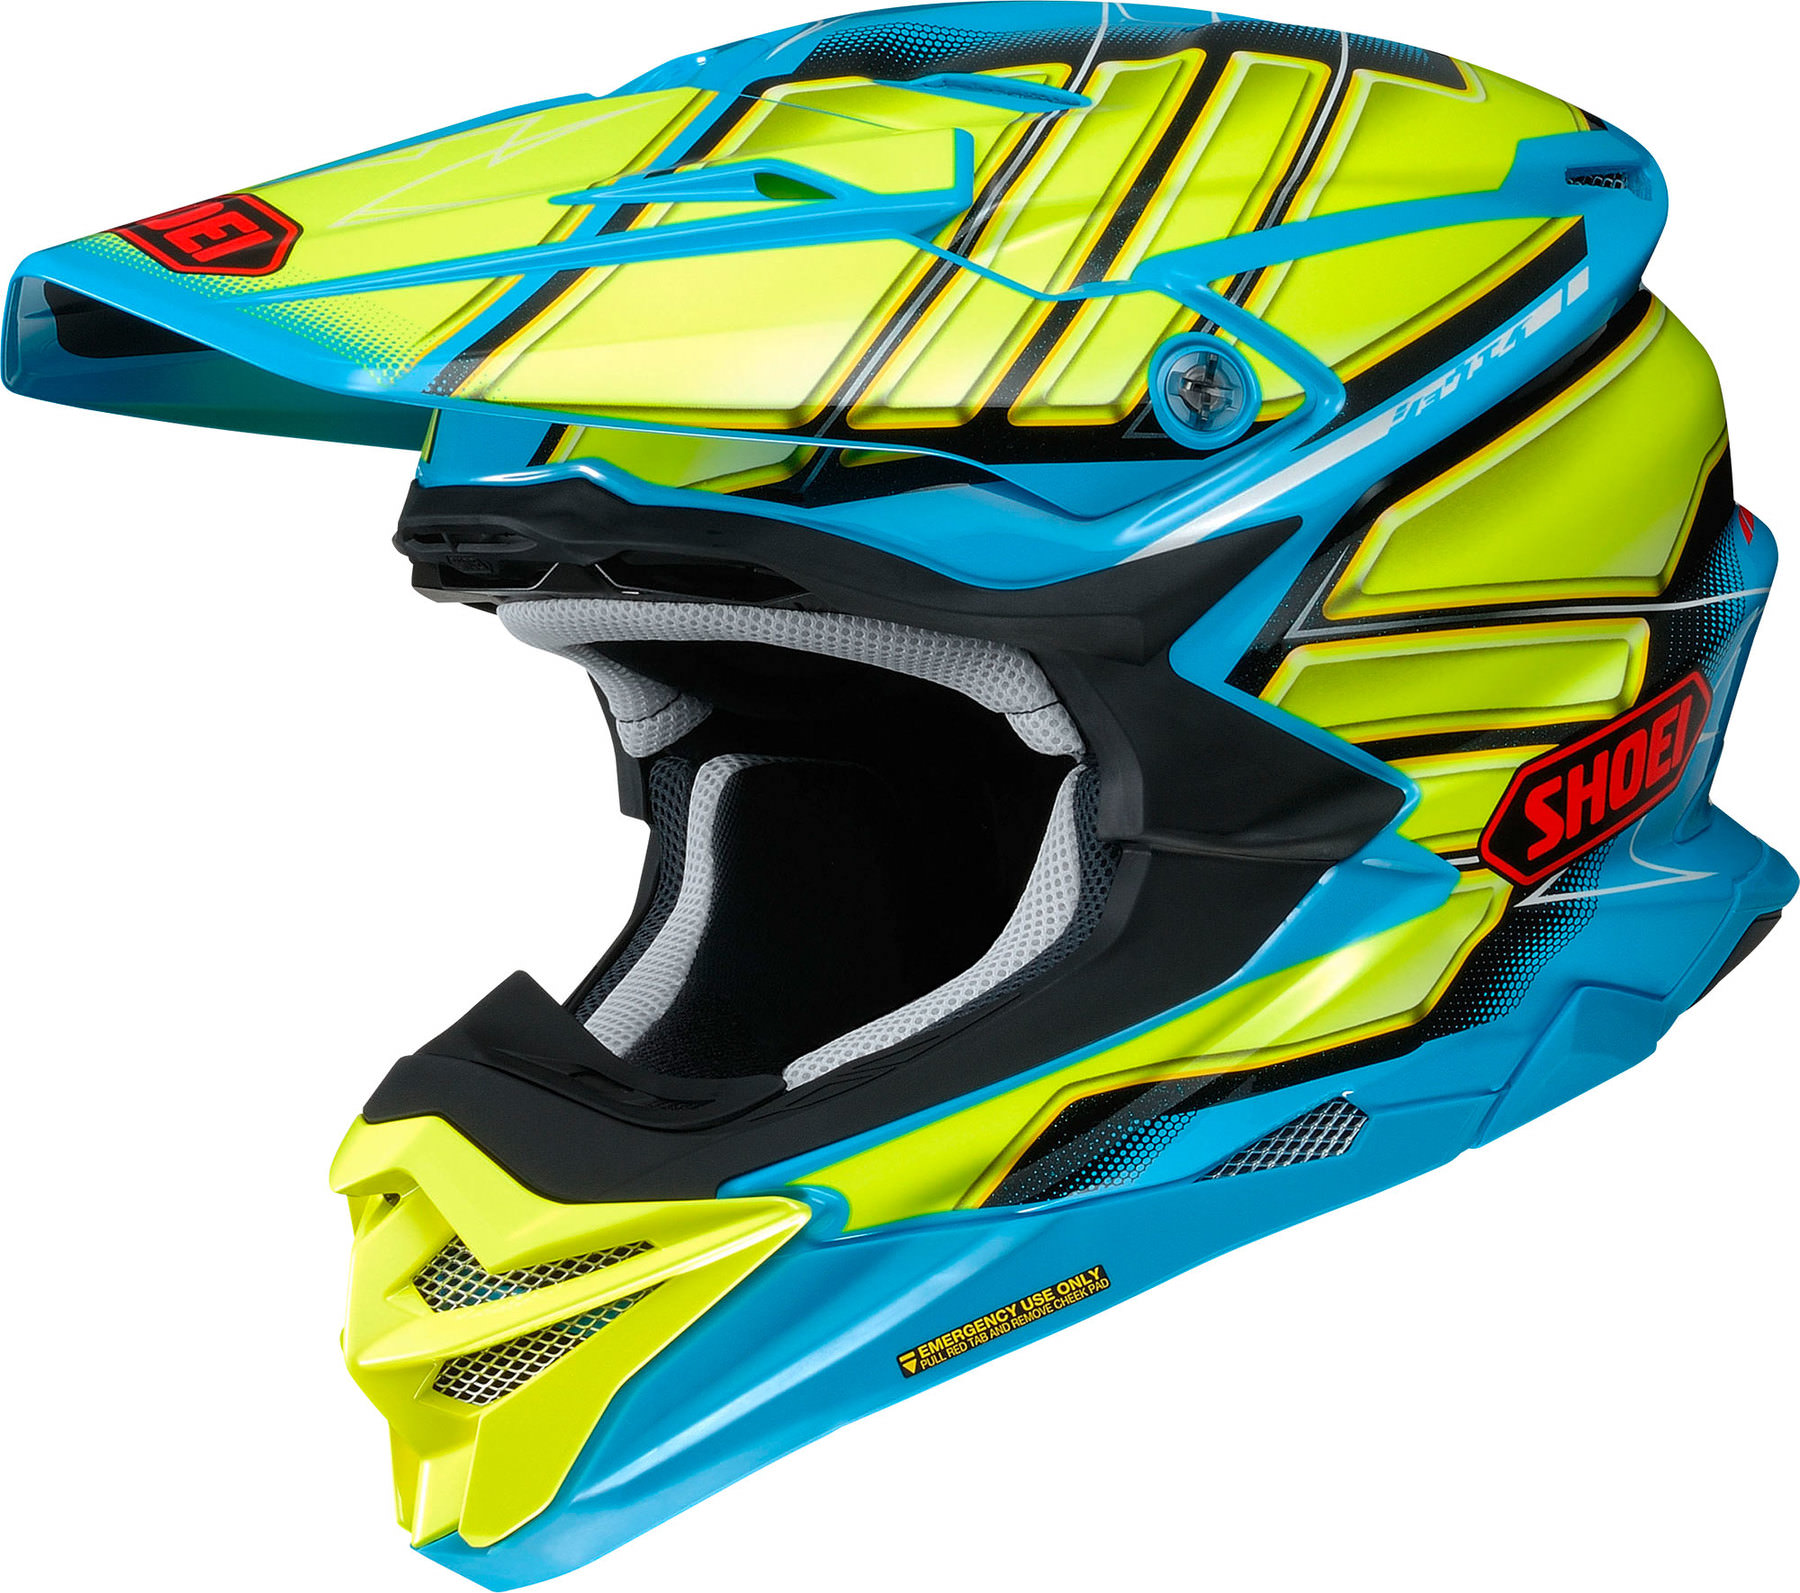 Buy Shoei Vfx Wr Glaivetc2 Motocross Helmet Louis Motorcycle Clothing And Technology